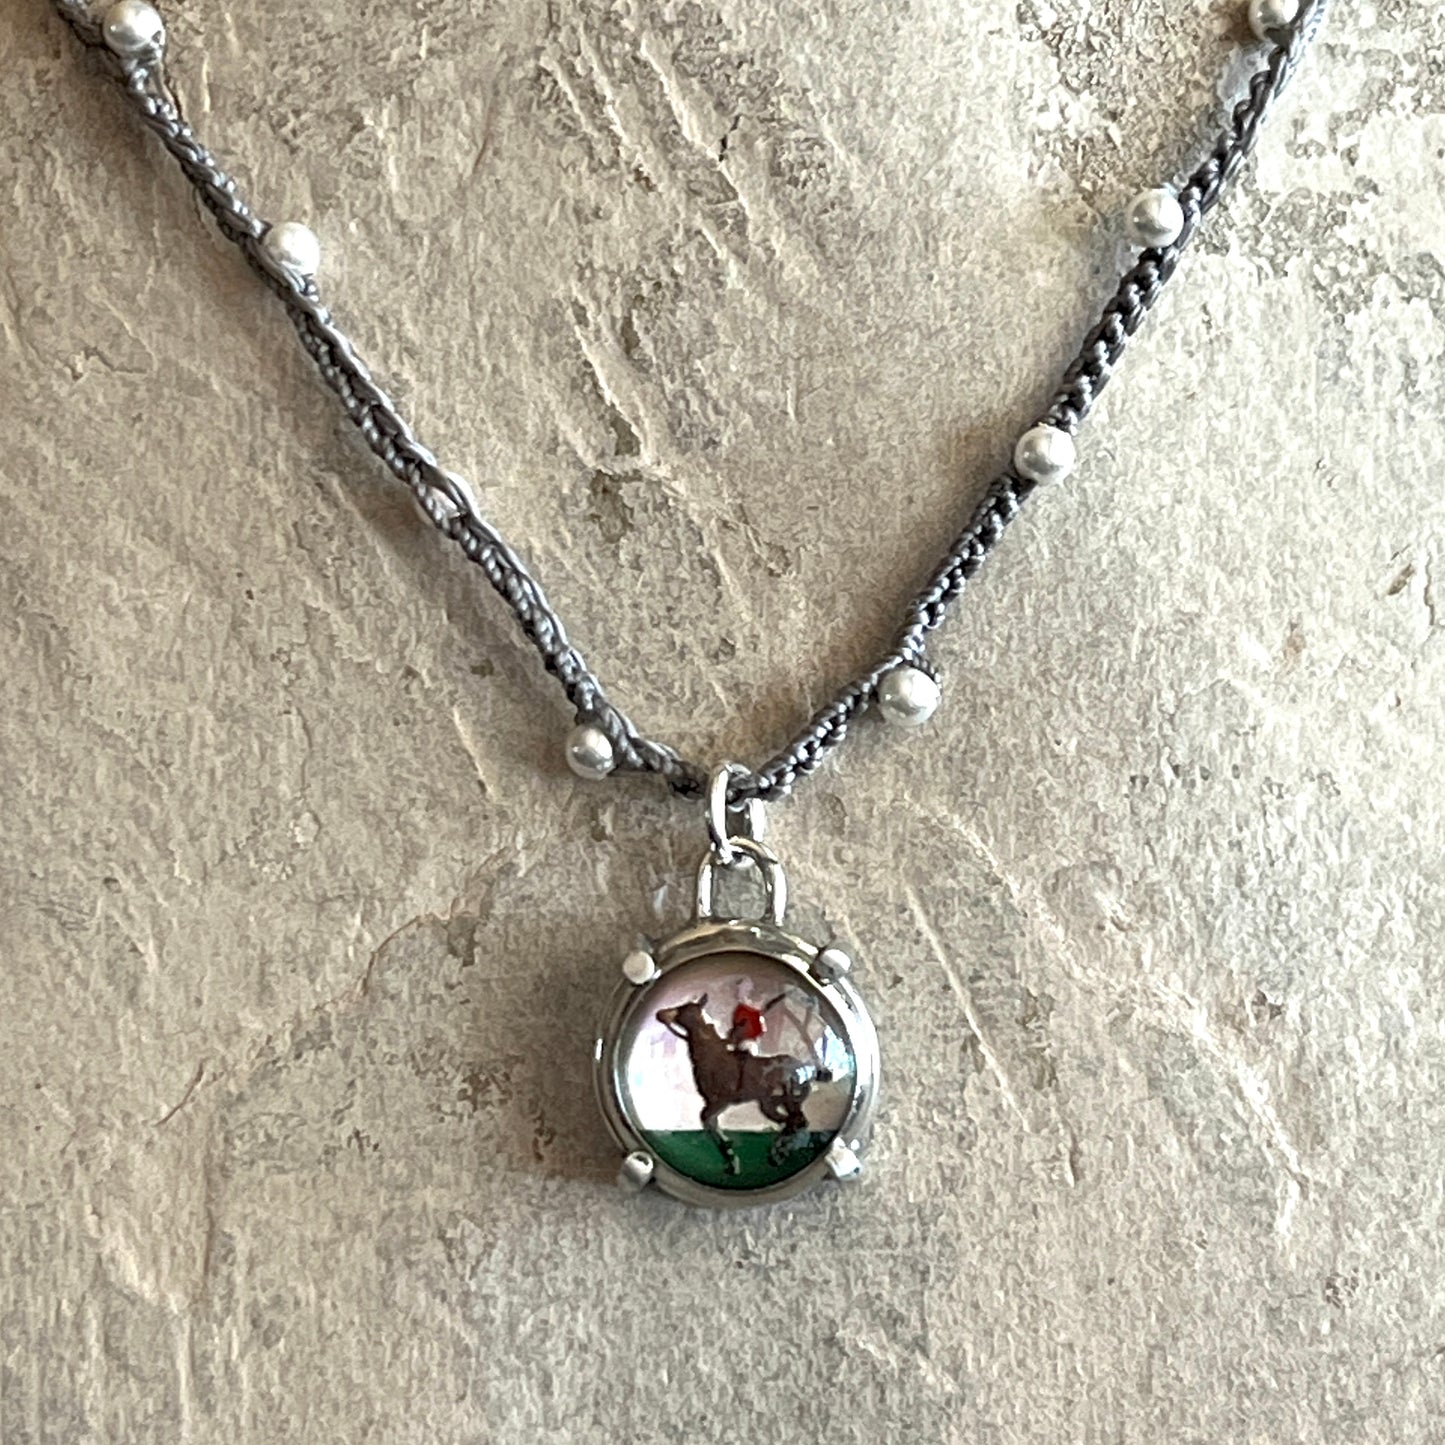 Little Lovely Polo Pony Intaglio Necklace